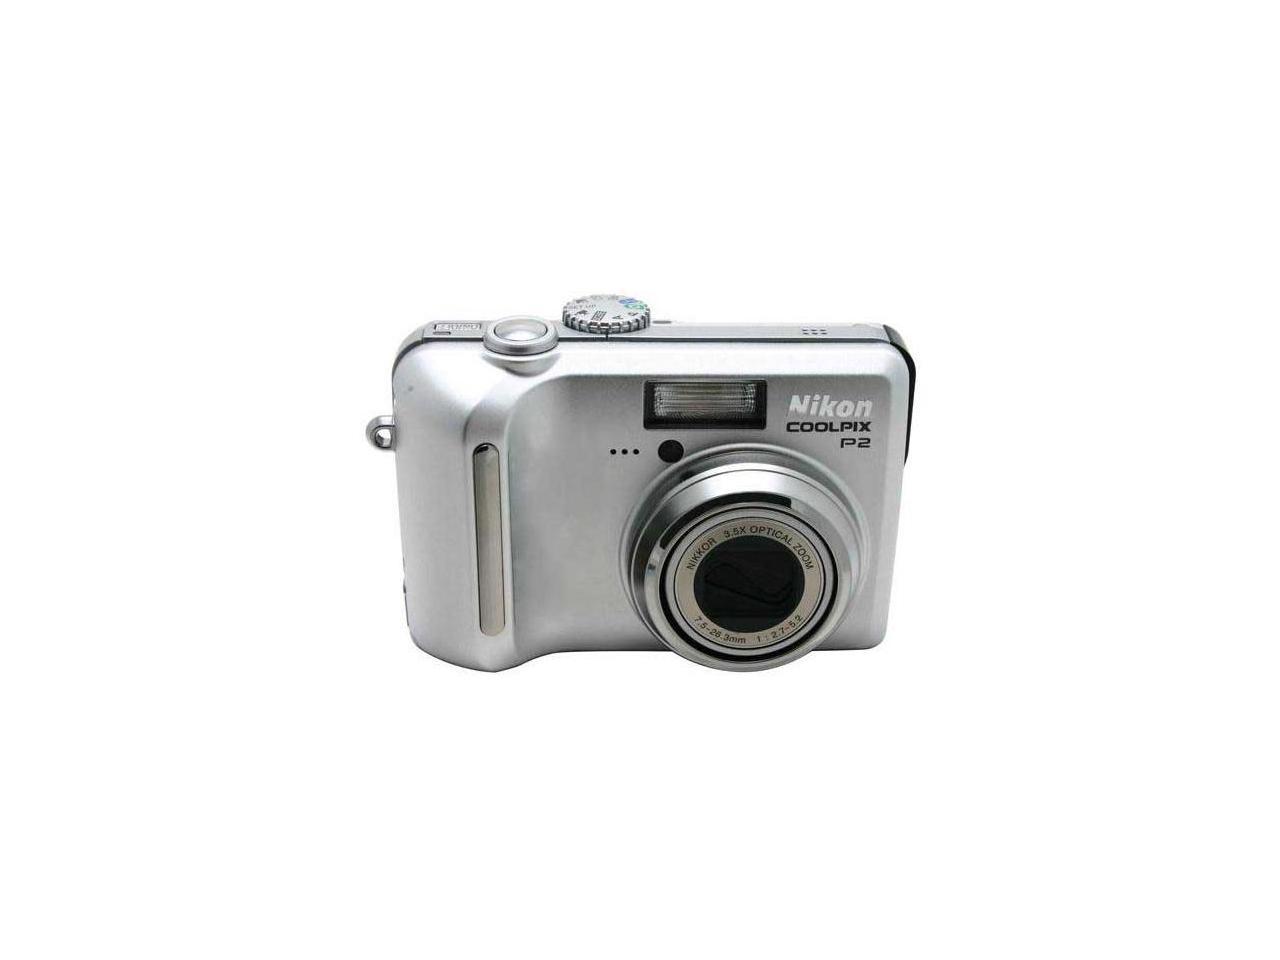 Nikon Coolpix P2 5.1MP Digital Camera with 3.5x Optical Zoom Wi-Fi Capable